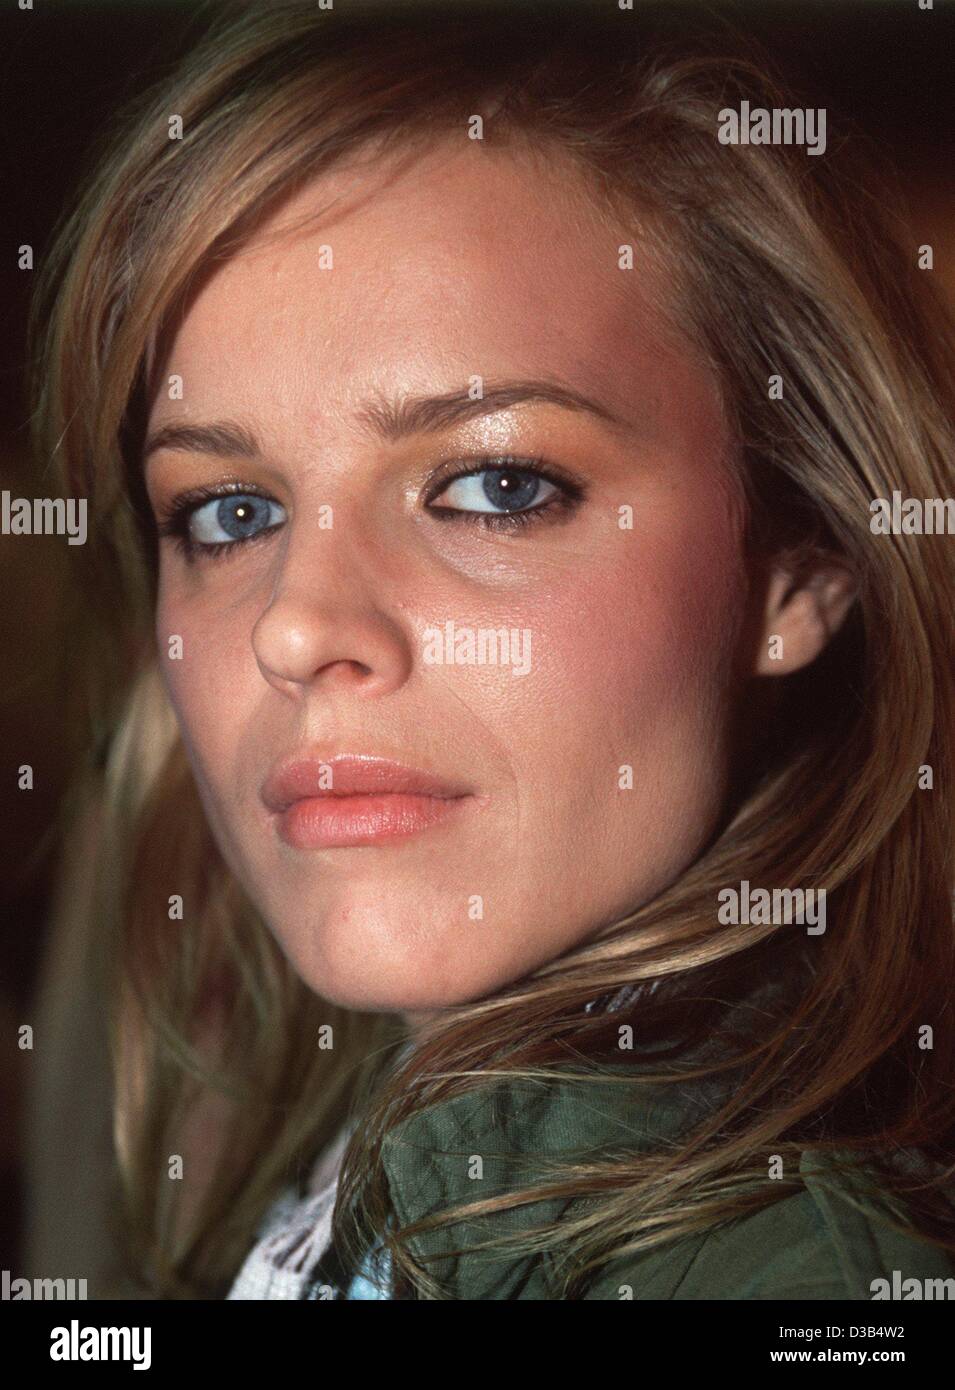 dpa) - Model Carmen Kass from Estonia presents the collection by Gucci  during the Pret-a-Porter shows in Paris, 1 March 2003 Stock Photo - Alamy